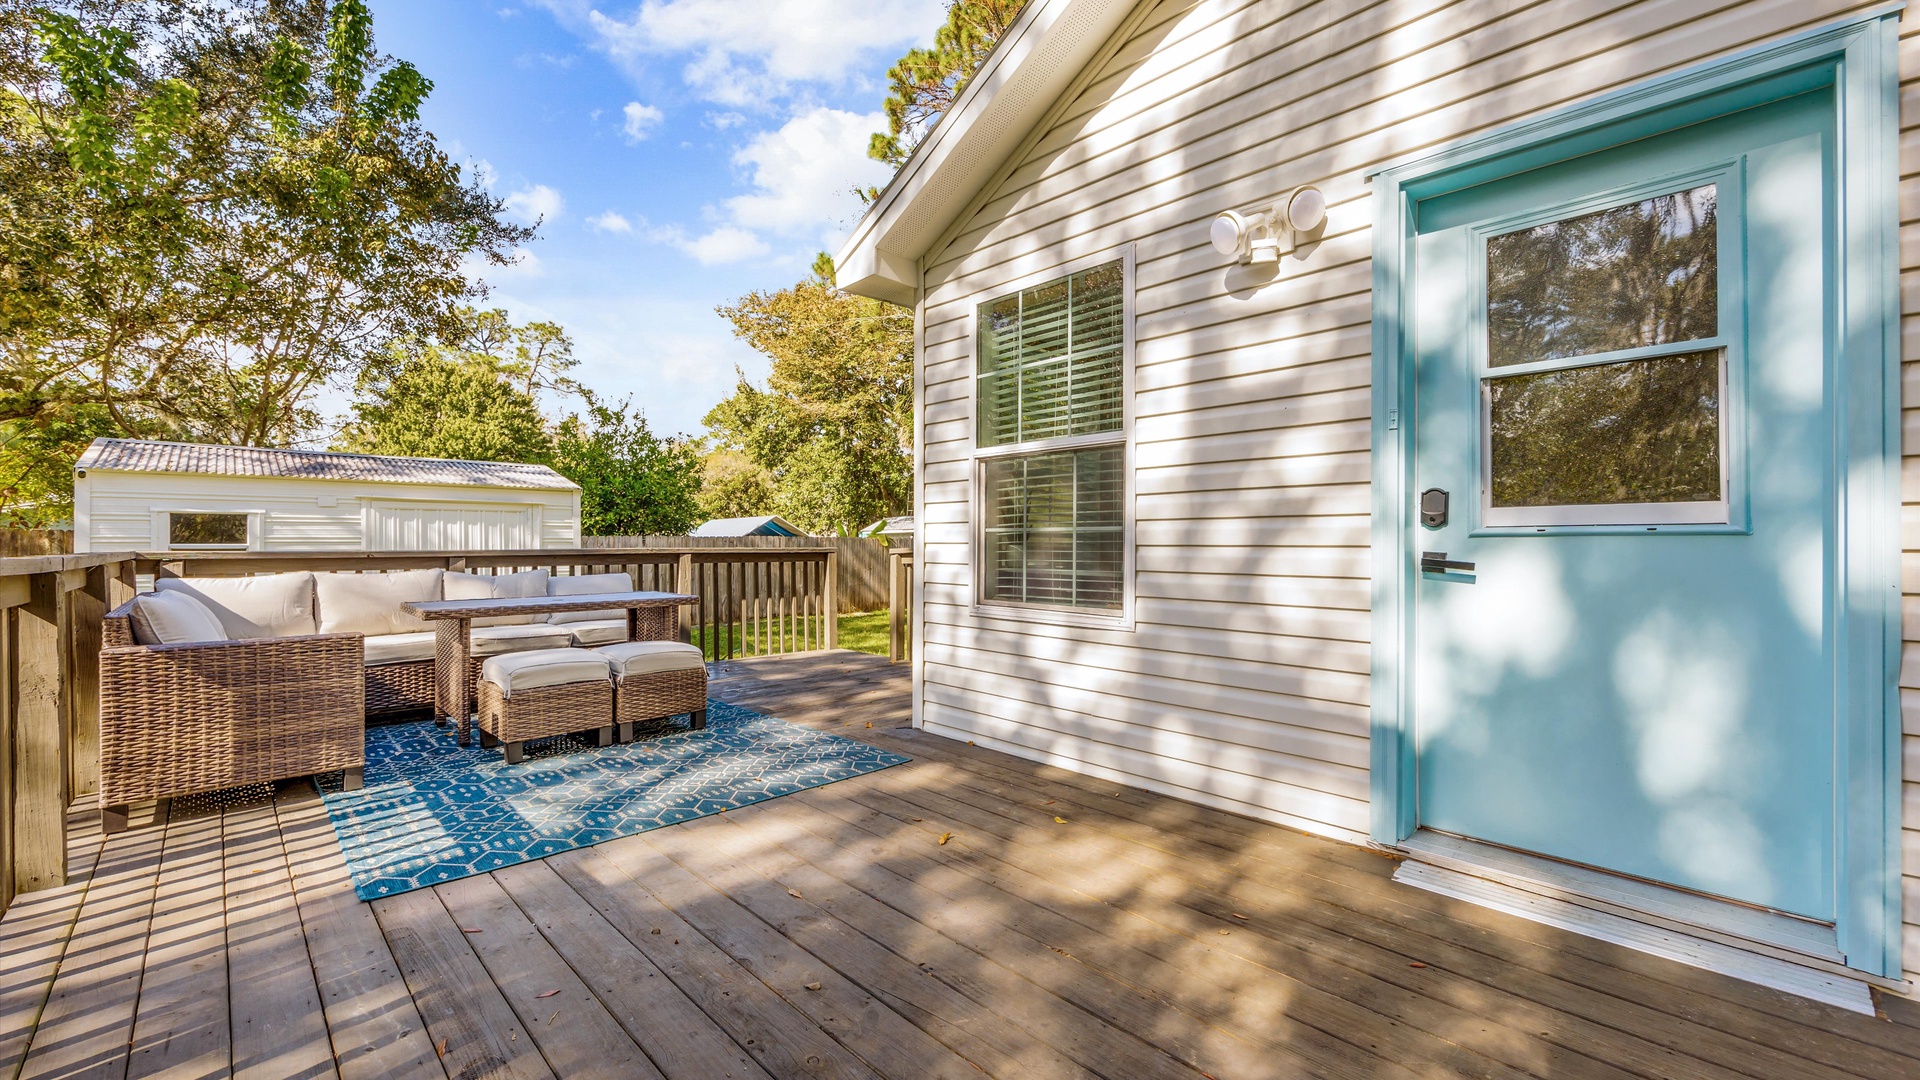 Step out onto the sunny back deck & lounge the day away in the fresh air